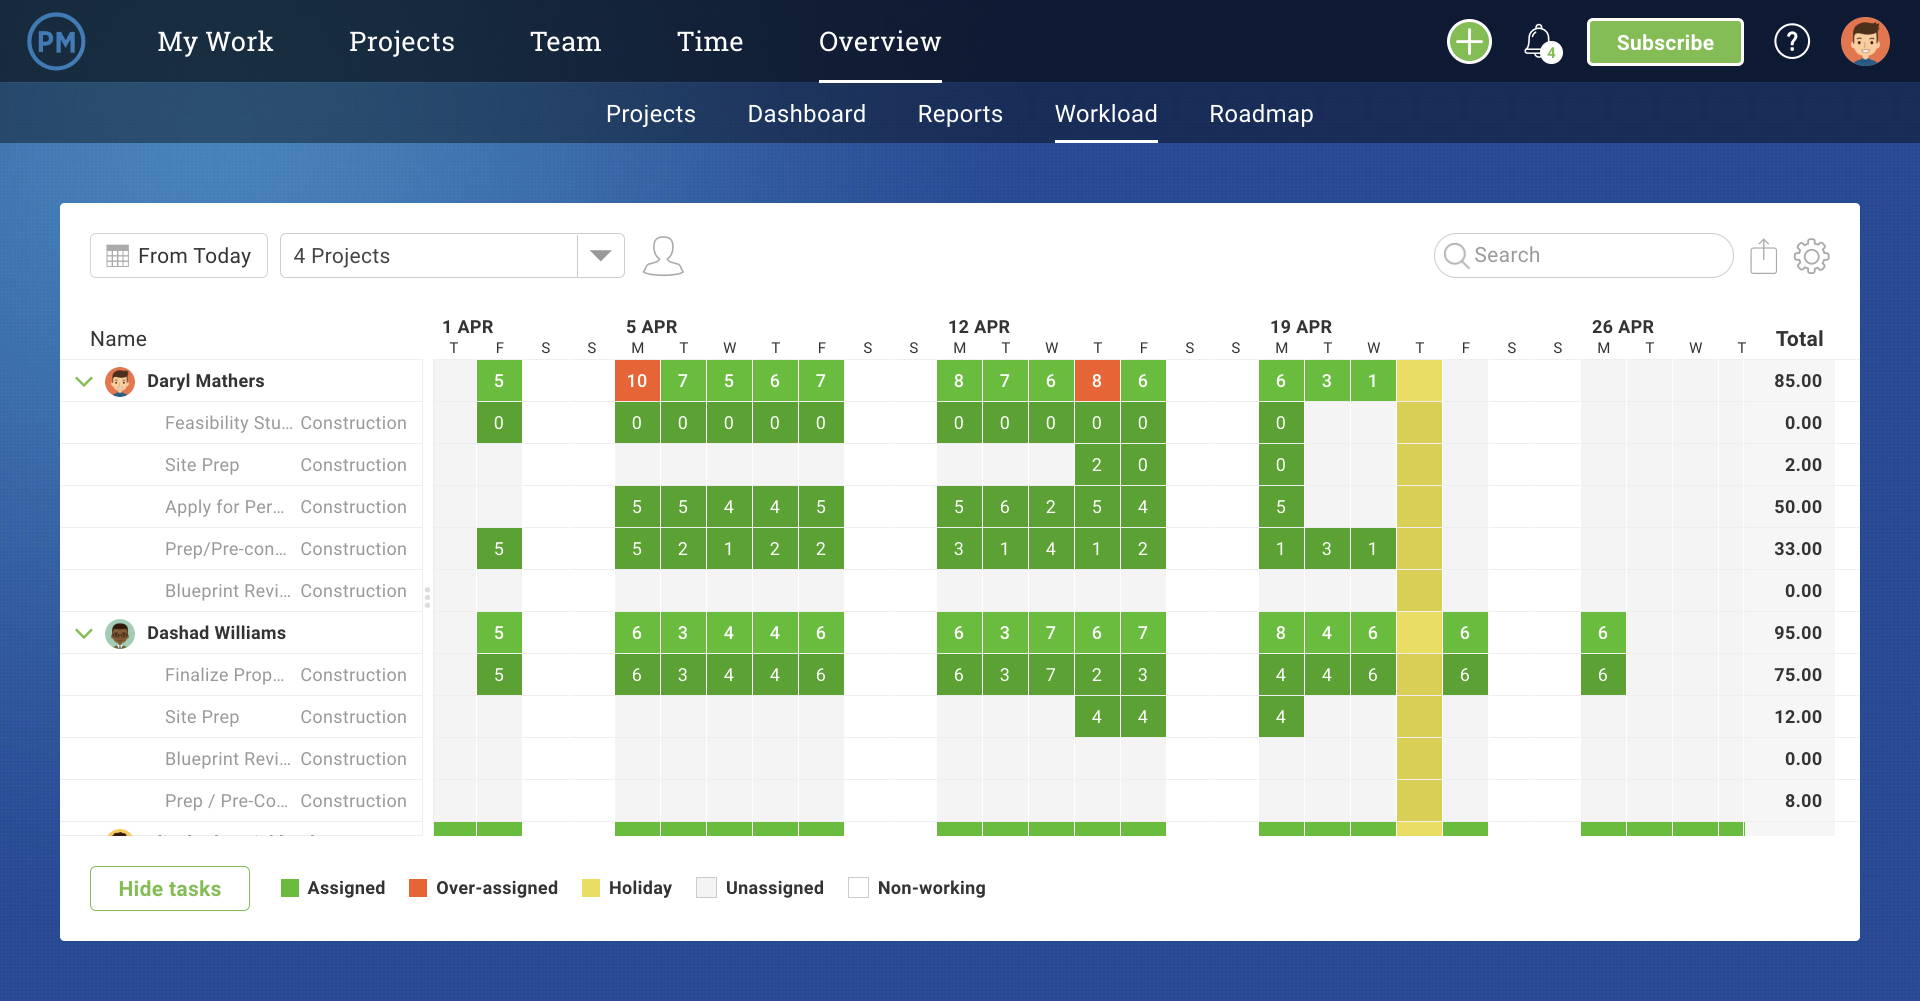 A screenshot of the Workload page in ProjectManager